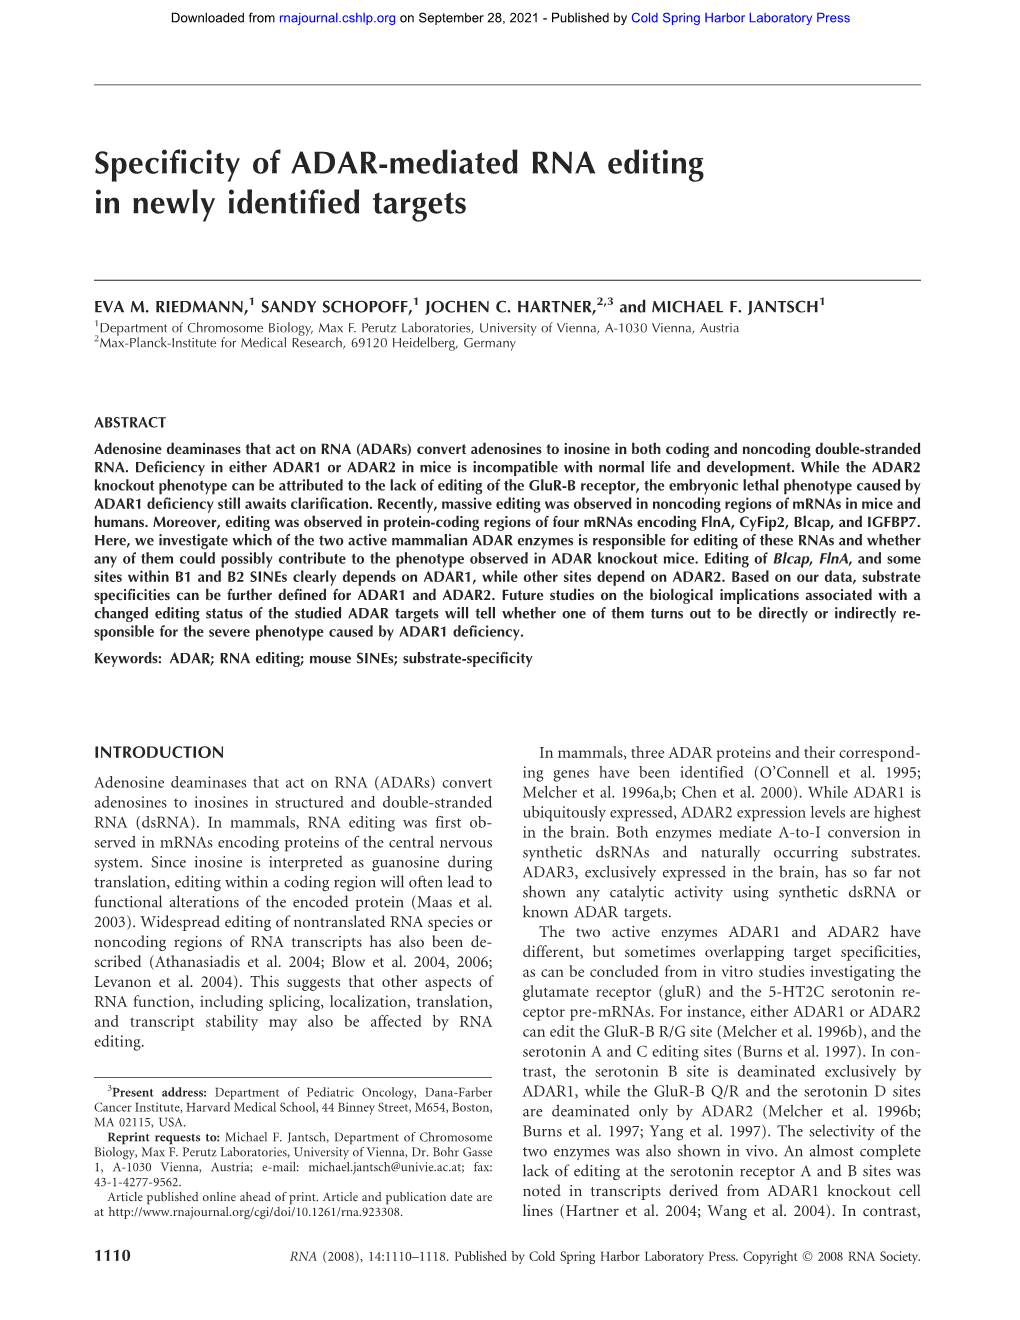 Specificity of ADAR-Mediated RNA Editing in Newly Identified Targets